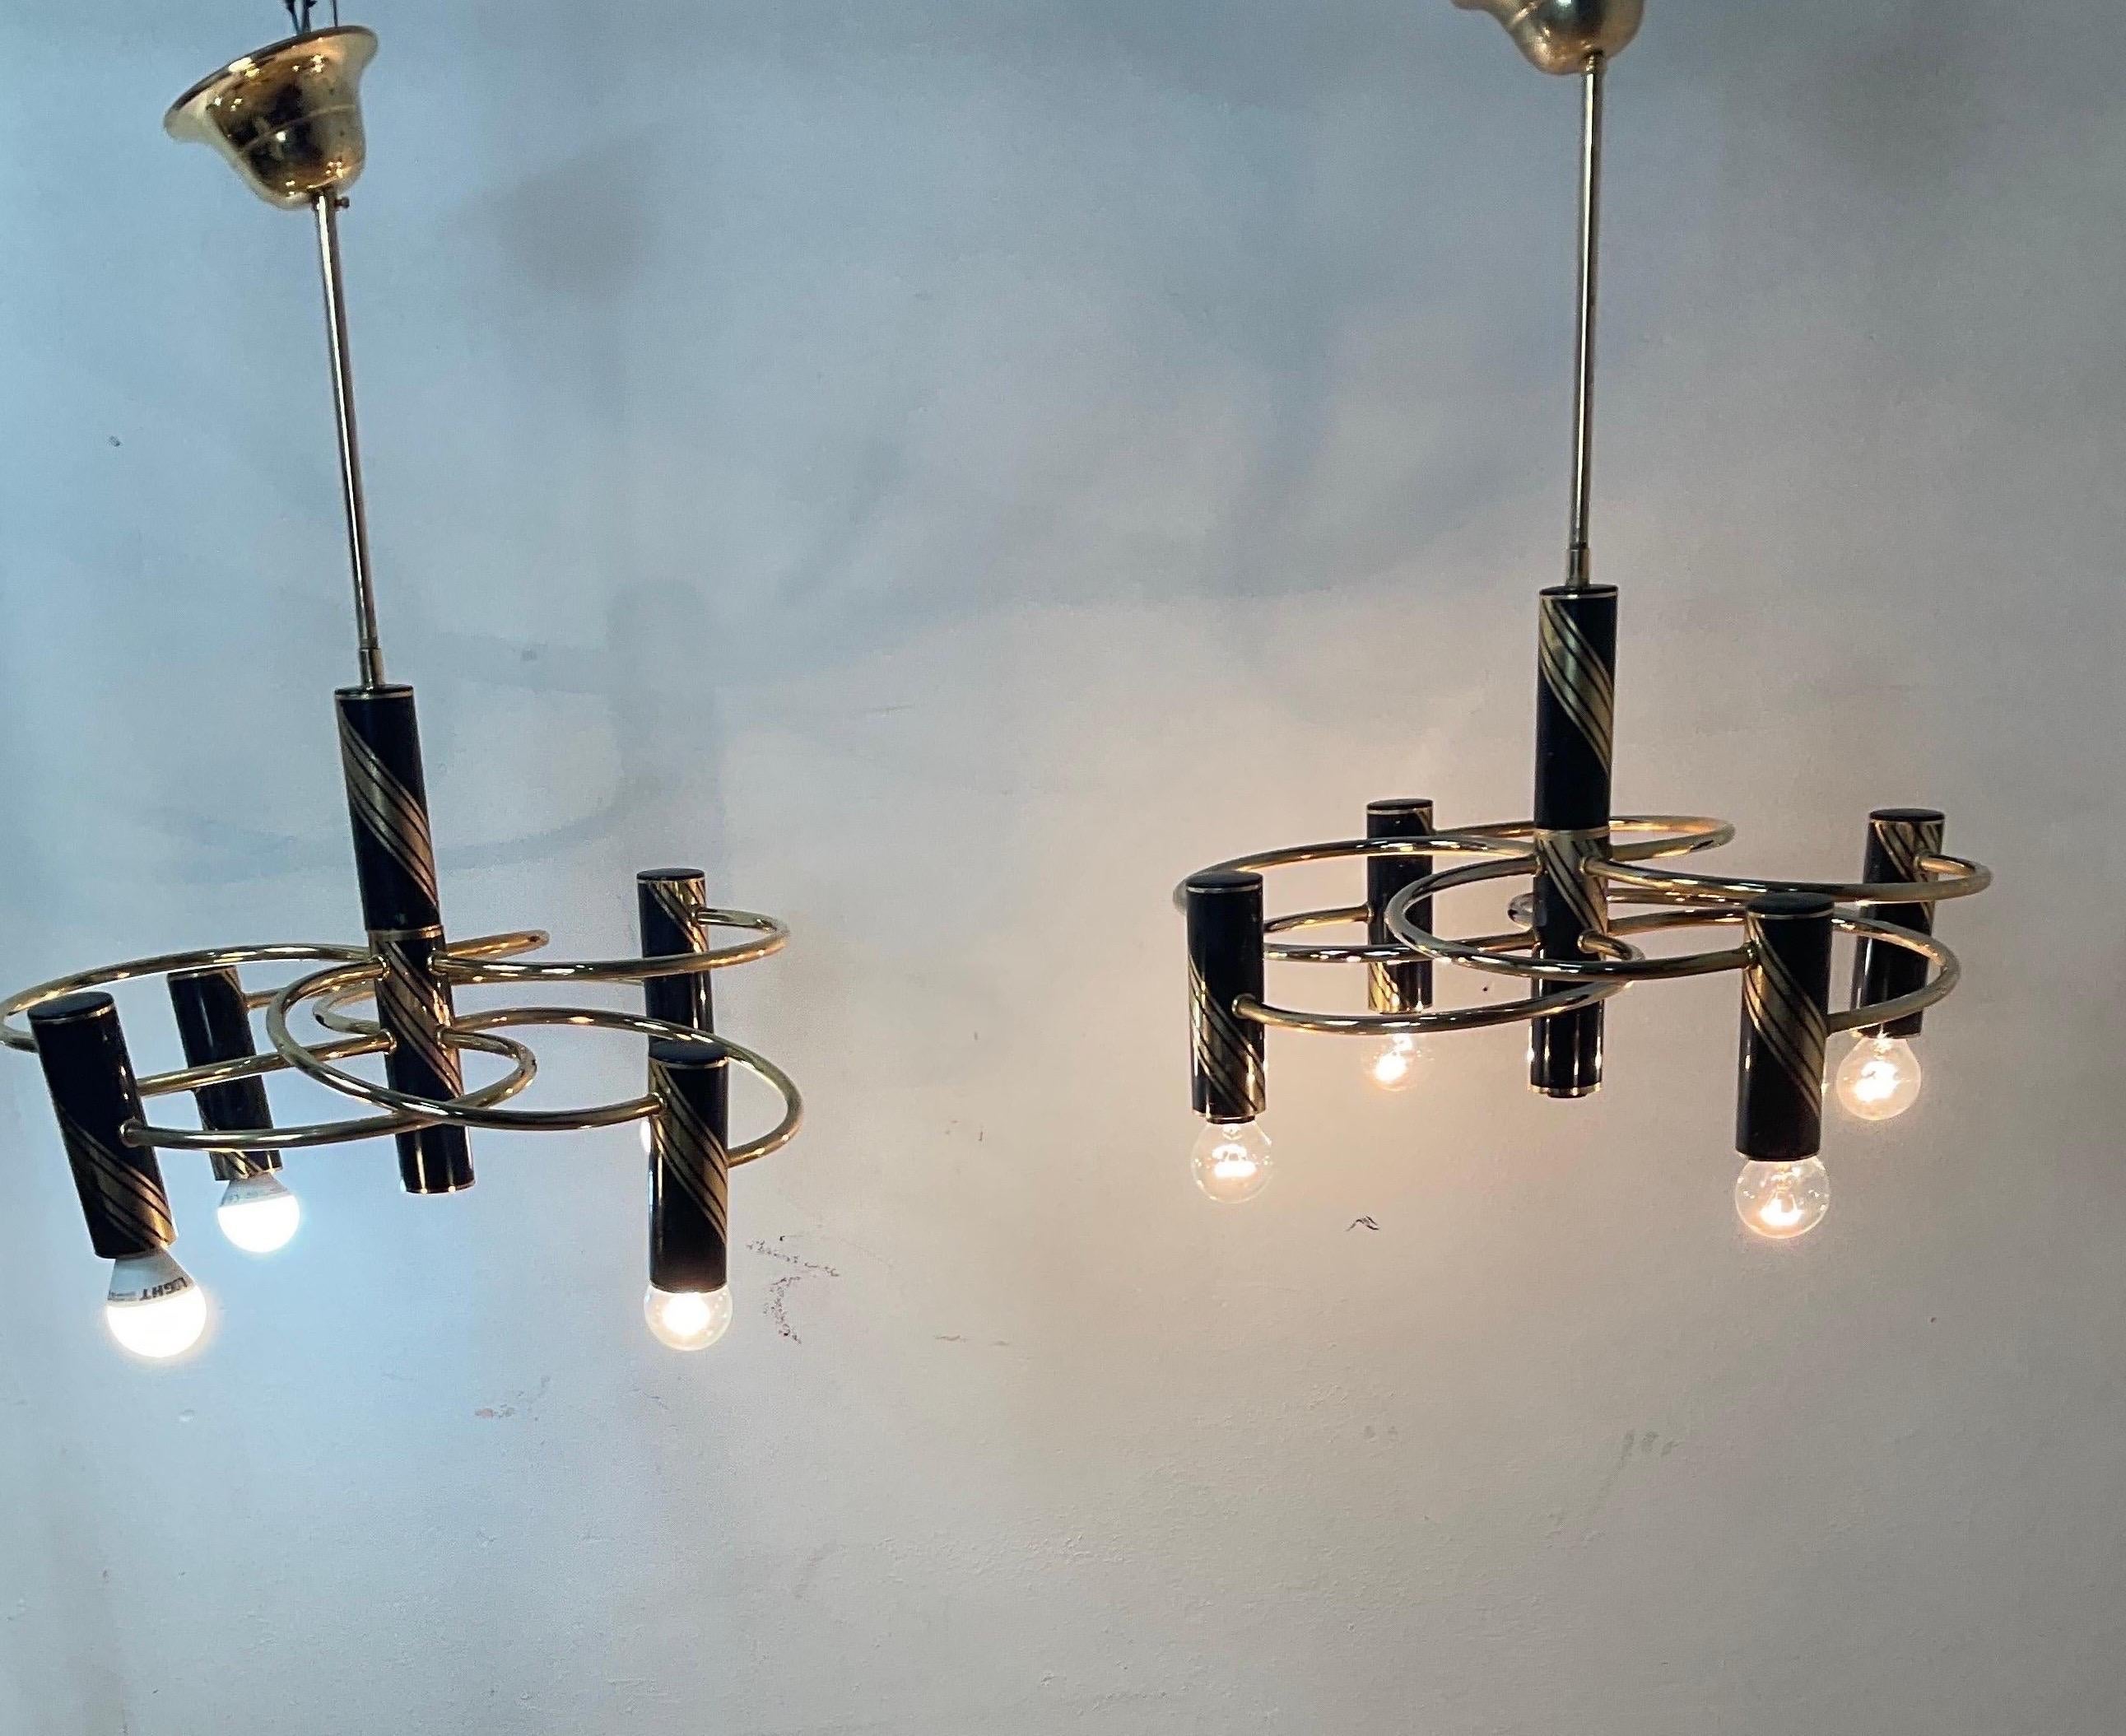 Pair of brass chandeliers by Gaetano Sciolari, 1970s. Chandelier consisting of 5 lights in good condition, wired power.